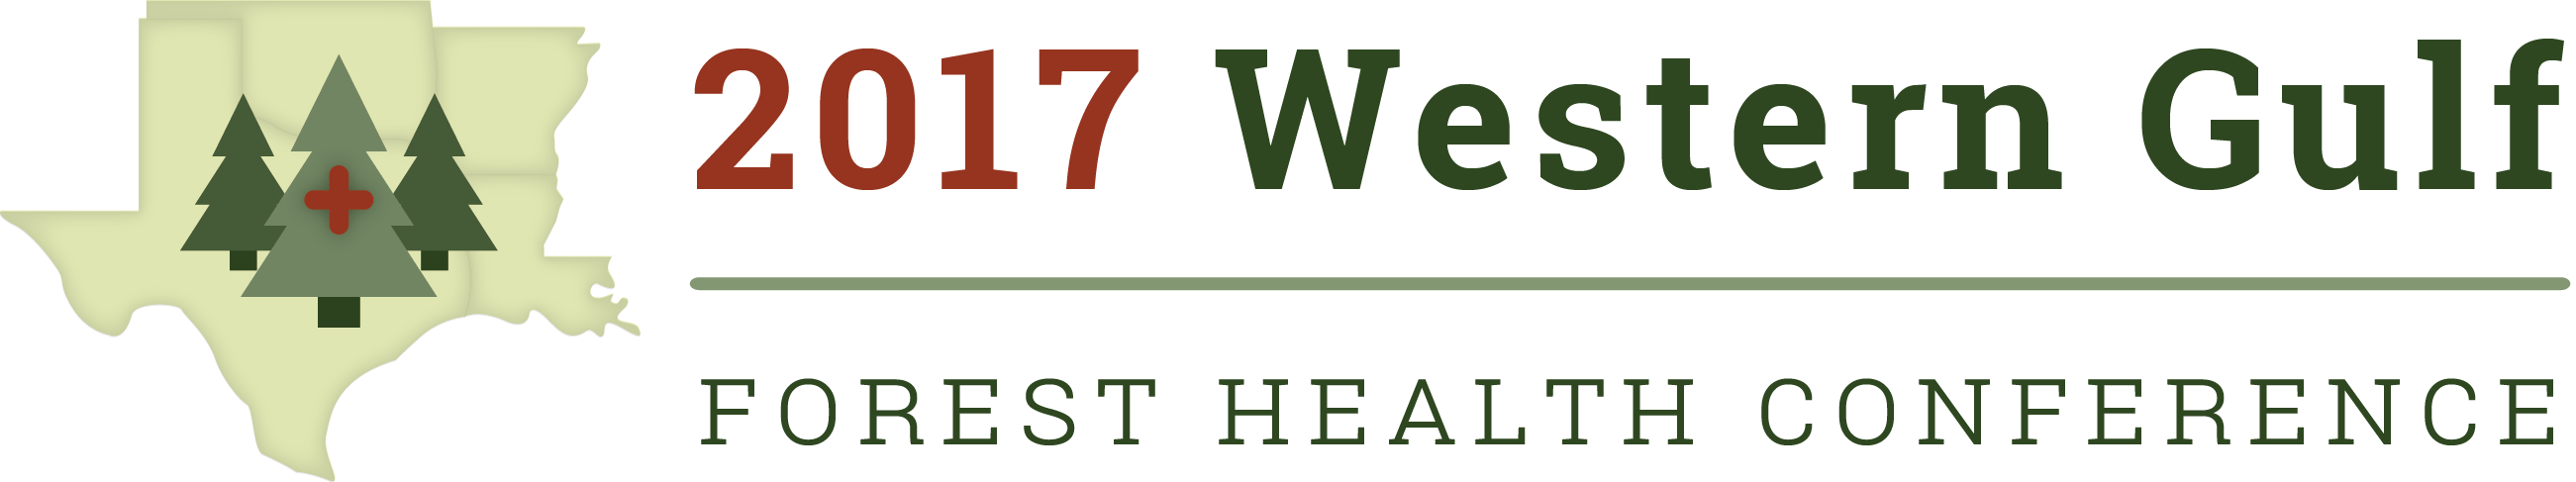 2017 Western Gulf Forest Health Conference Logo